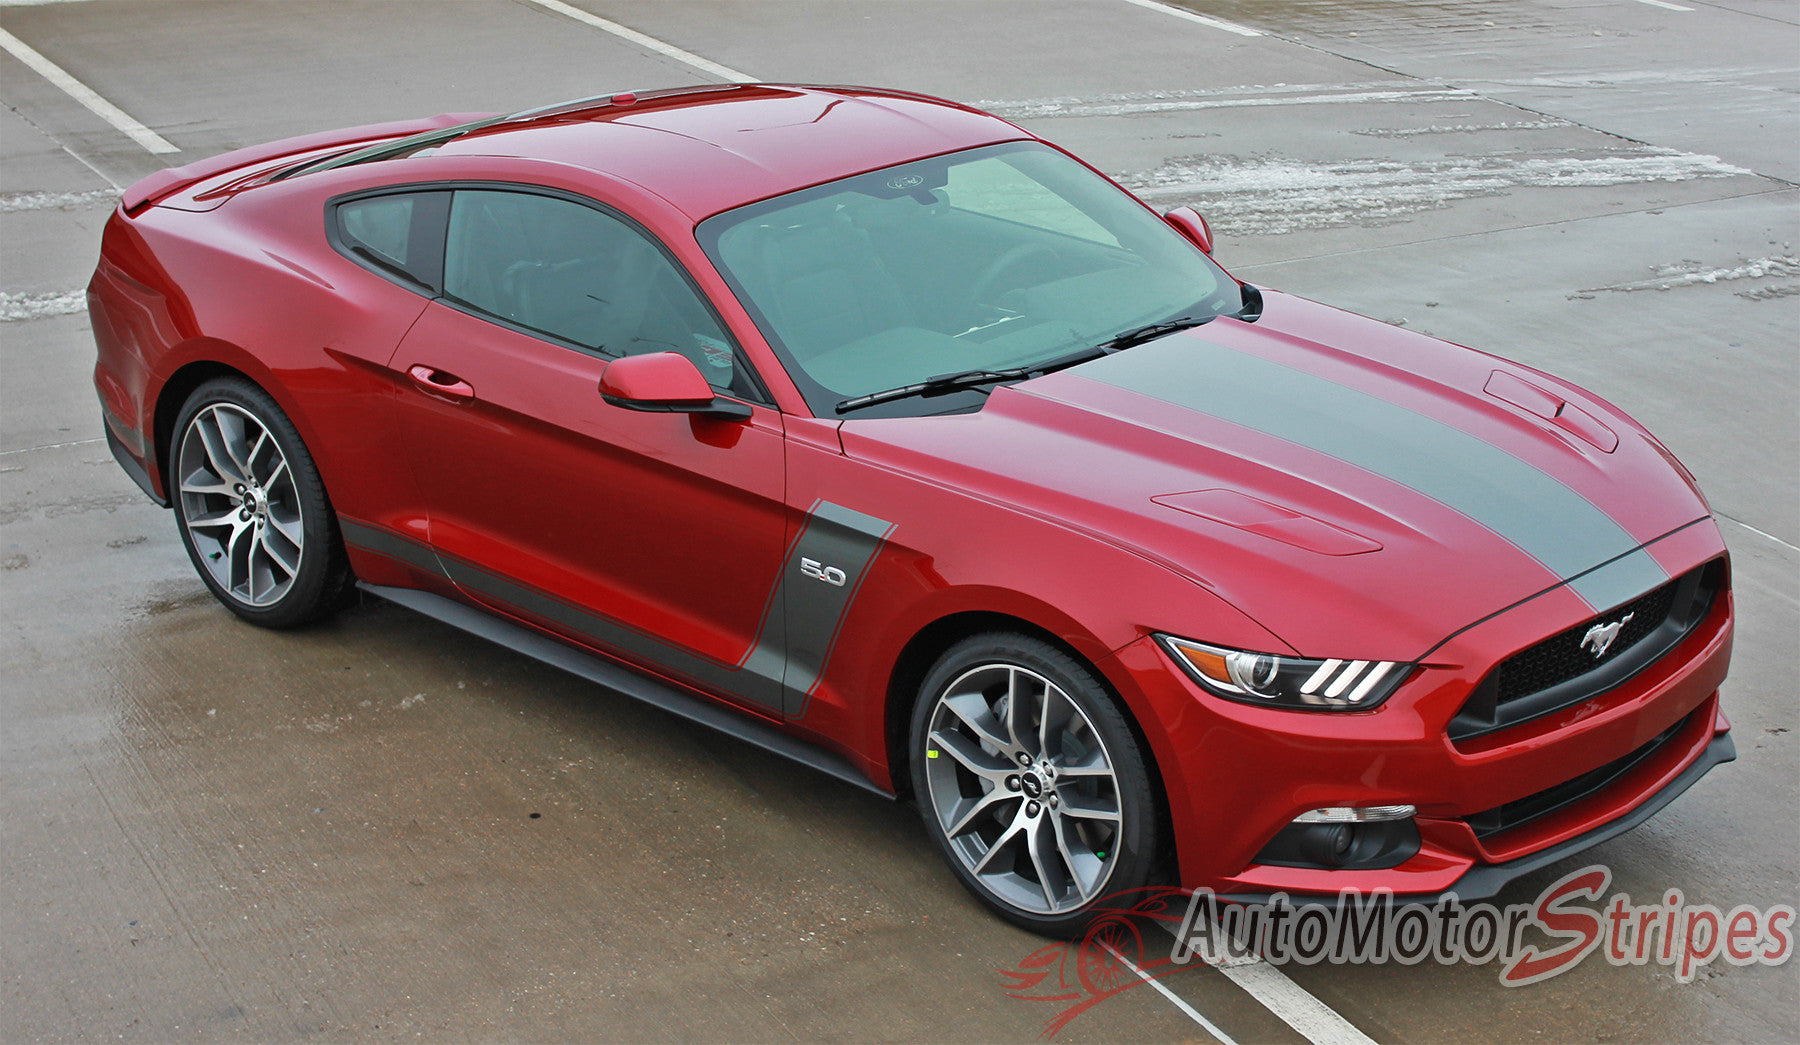 Ford Mustang Vinyl Graphics Decals Stripes Kits Packages for 2009 2010 2011 2012 2013 2014 2015 2016 2017 